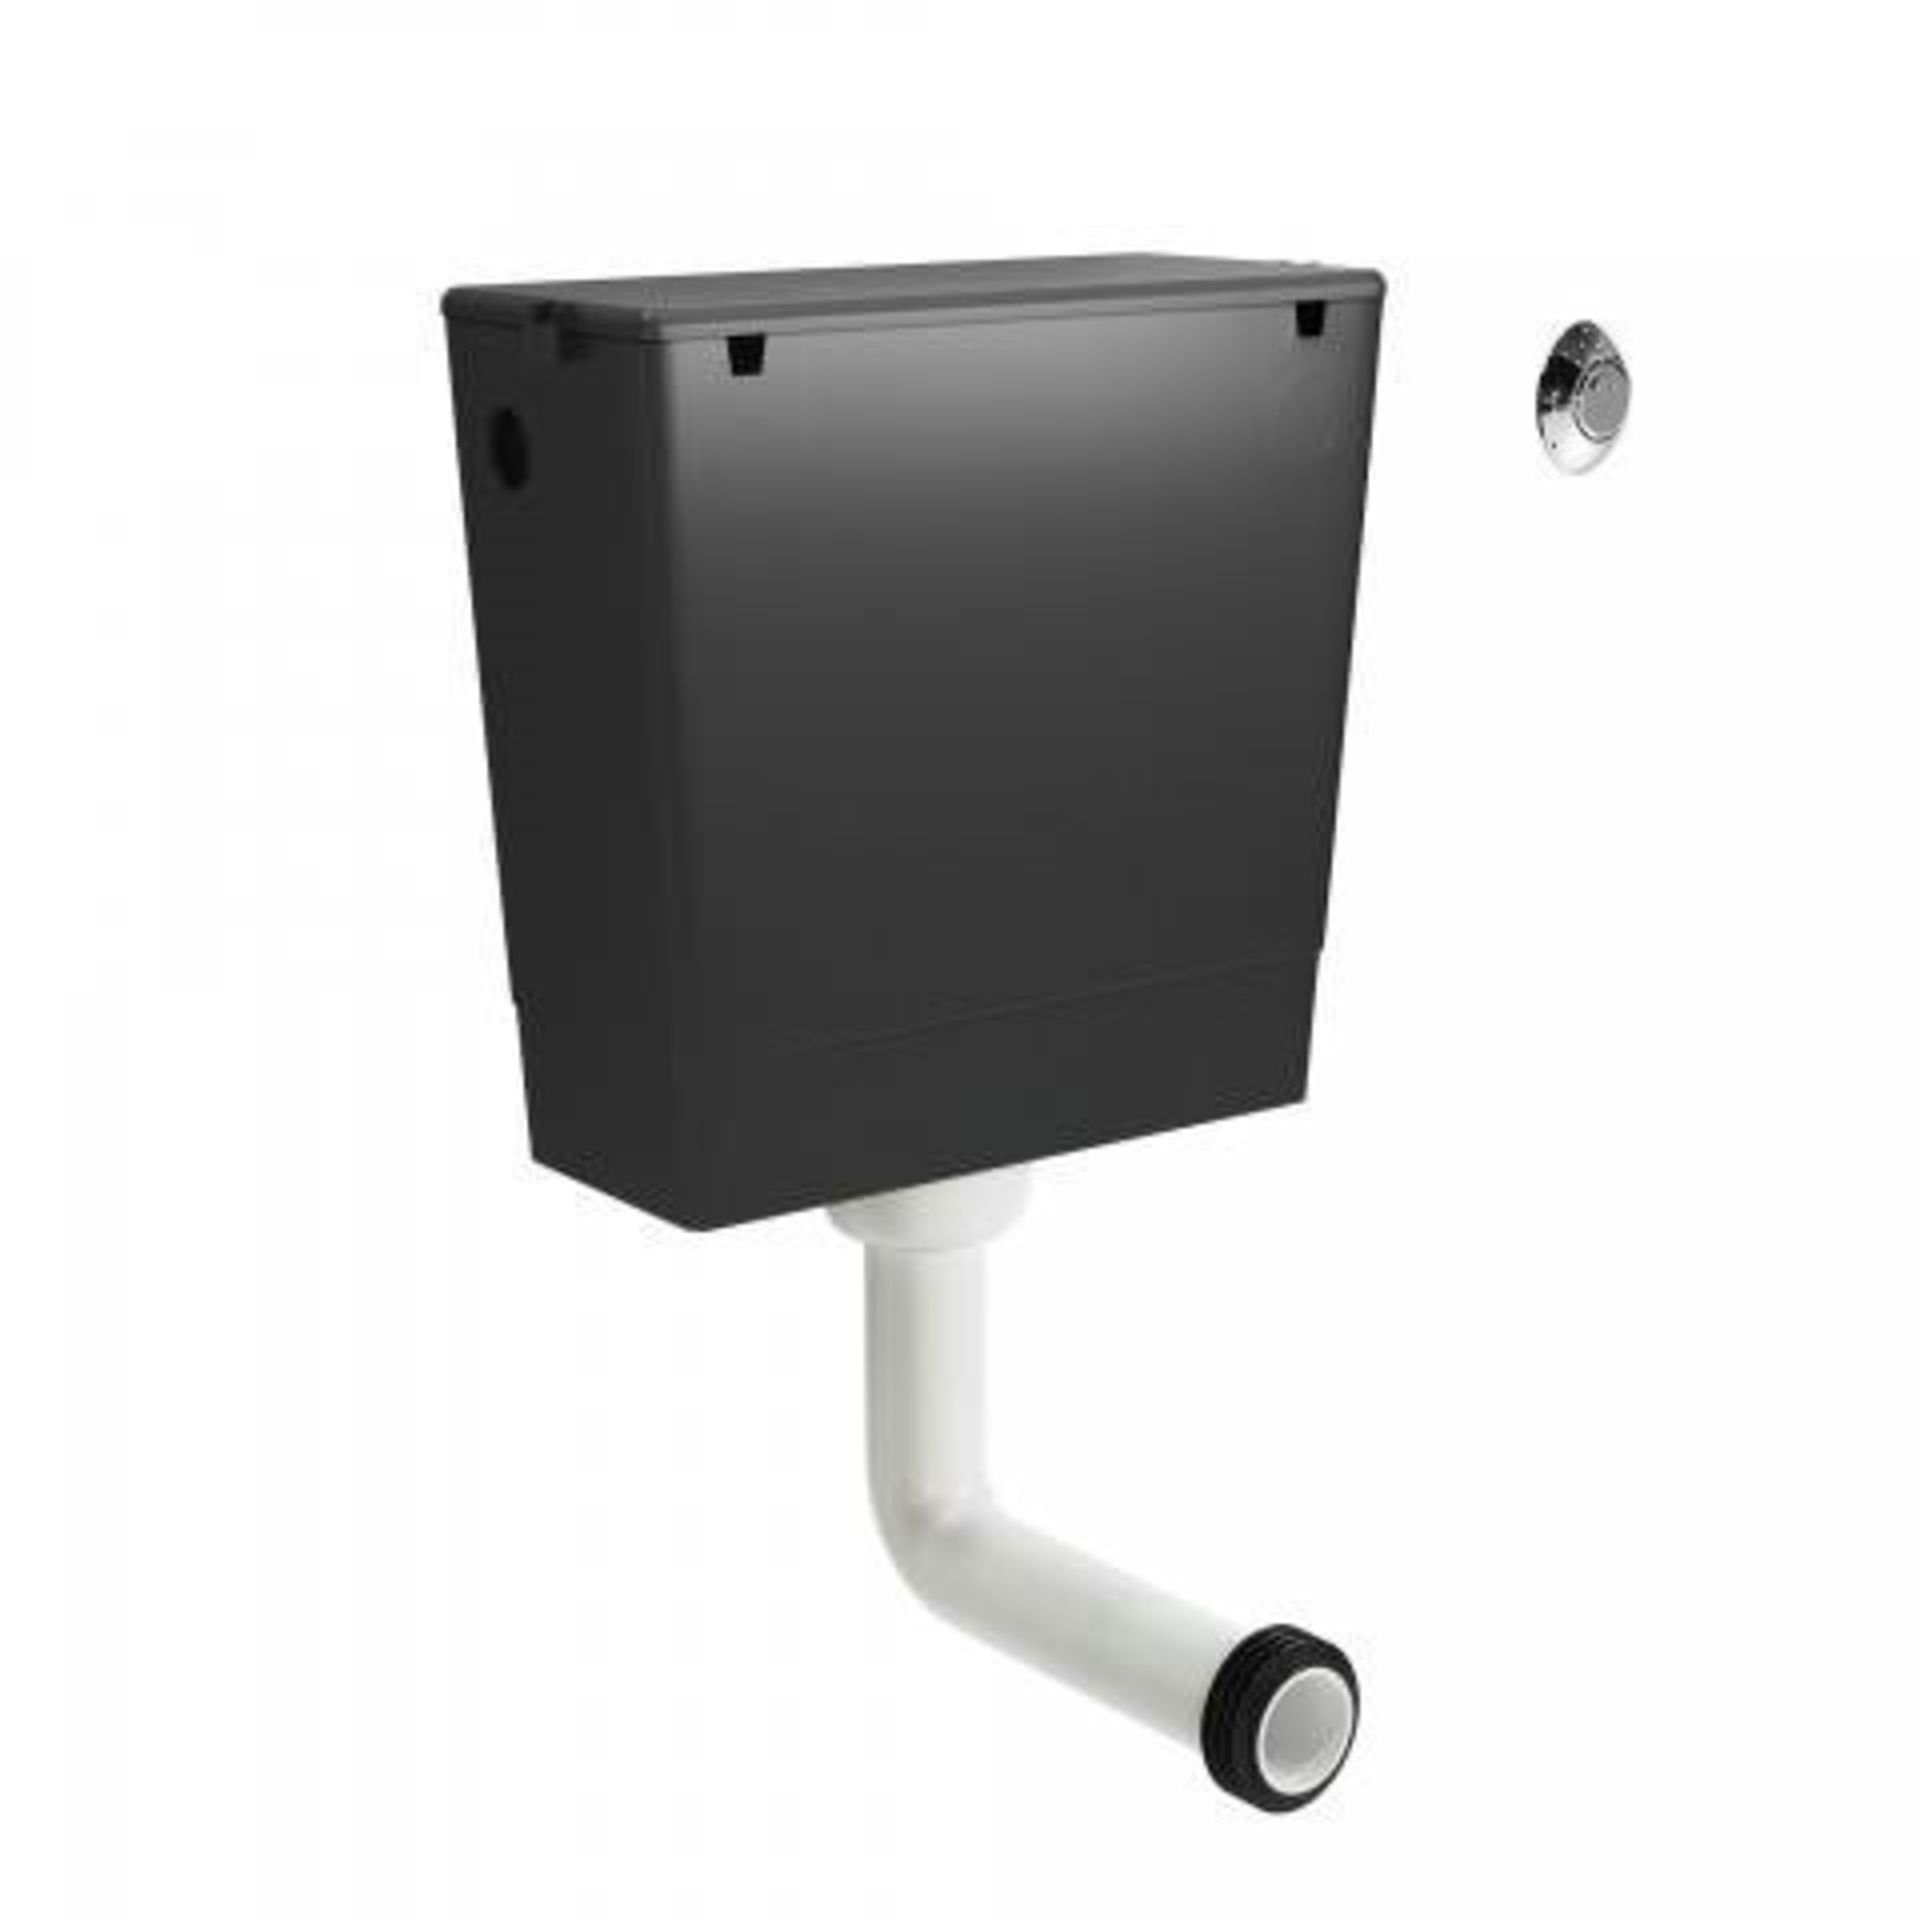 Wirquin Dual Flush Concealed Cistern. RRP £69.99.This Dual Flush Concealed Cistern is designe...